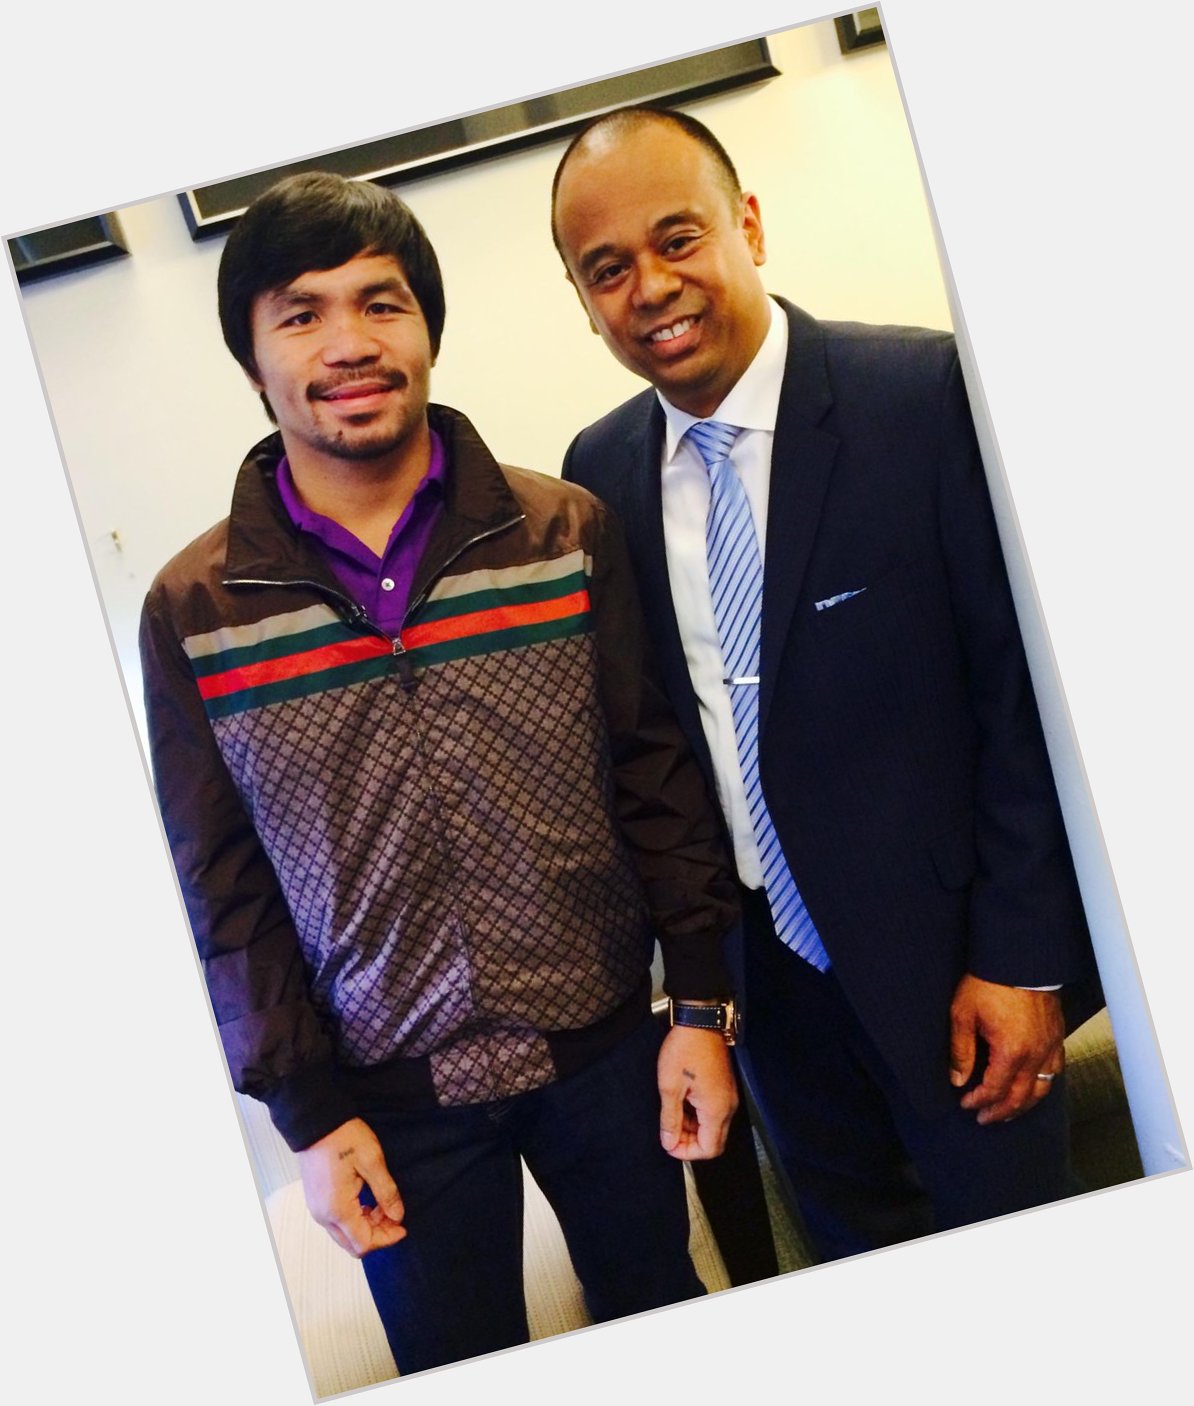 Since it s Dec. 17th in the Philippines... Happy birthday to the champ, Manny Pacquiao! 